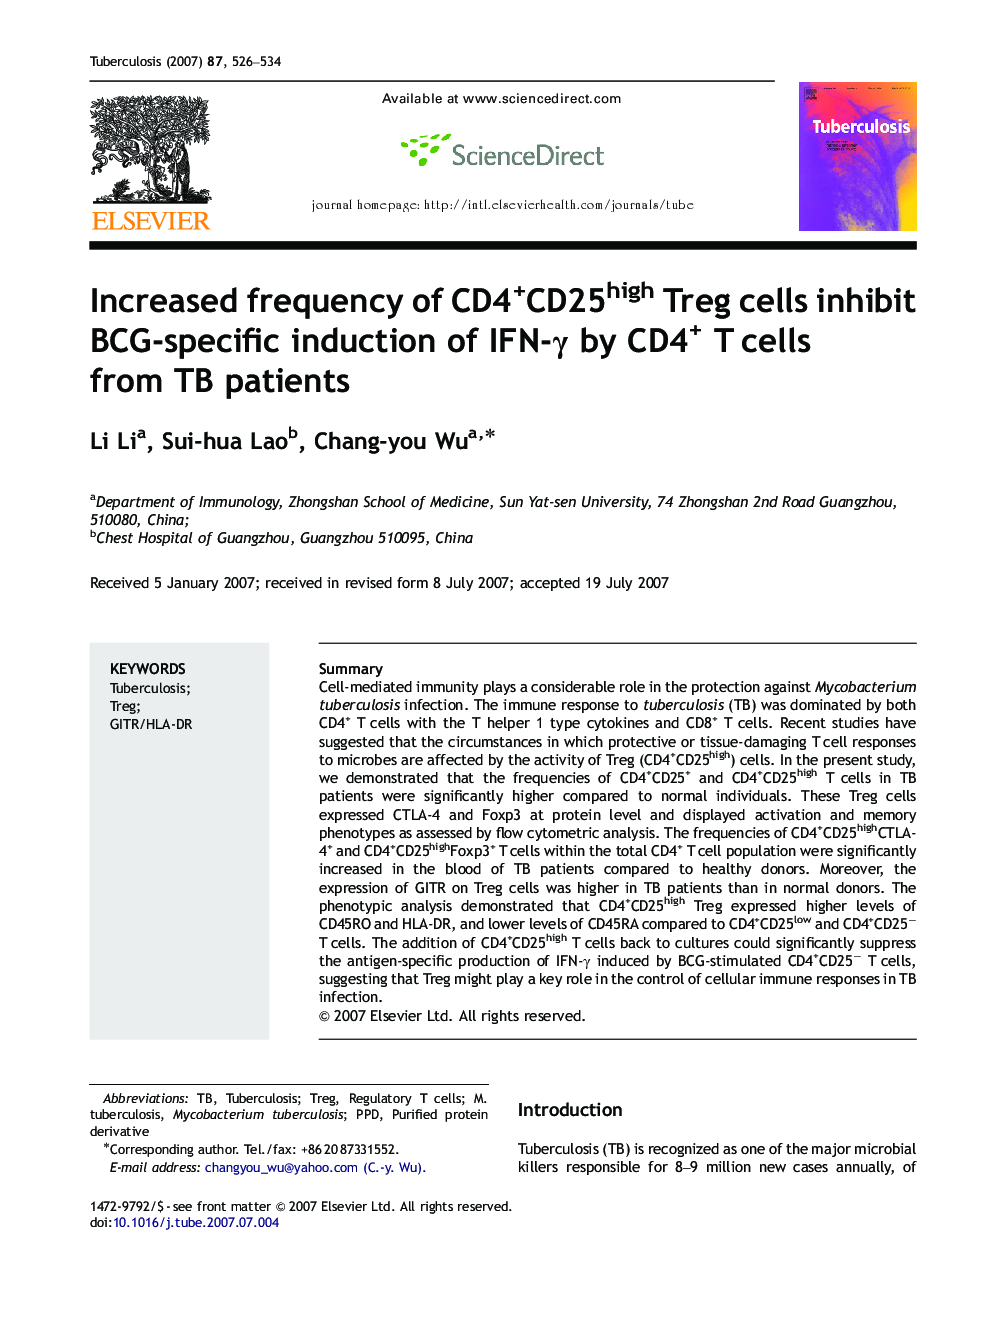 Increased frequency of CD4+CD25high Treg cells inhibit BCG-specific induction of IFN-γ by CD4+ T cells from TB patients